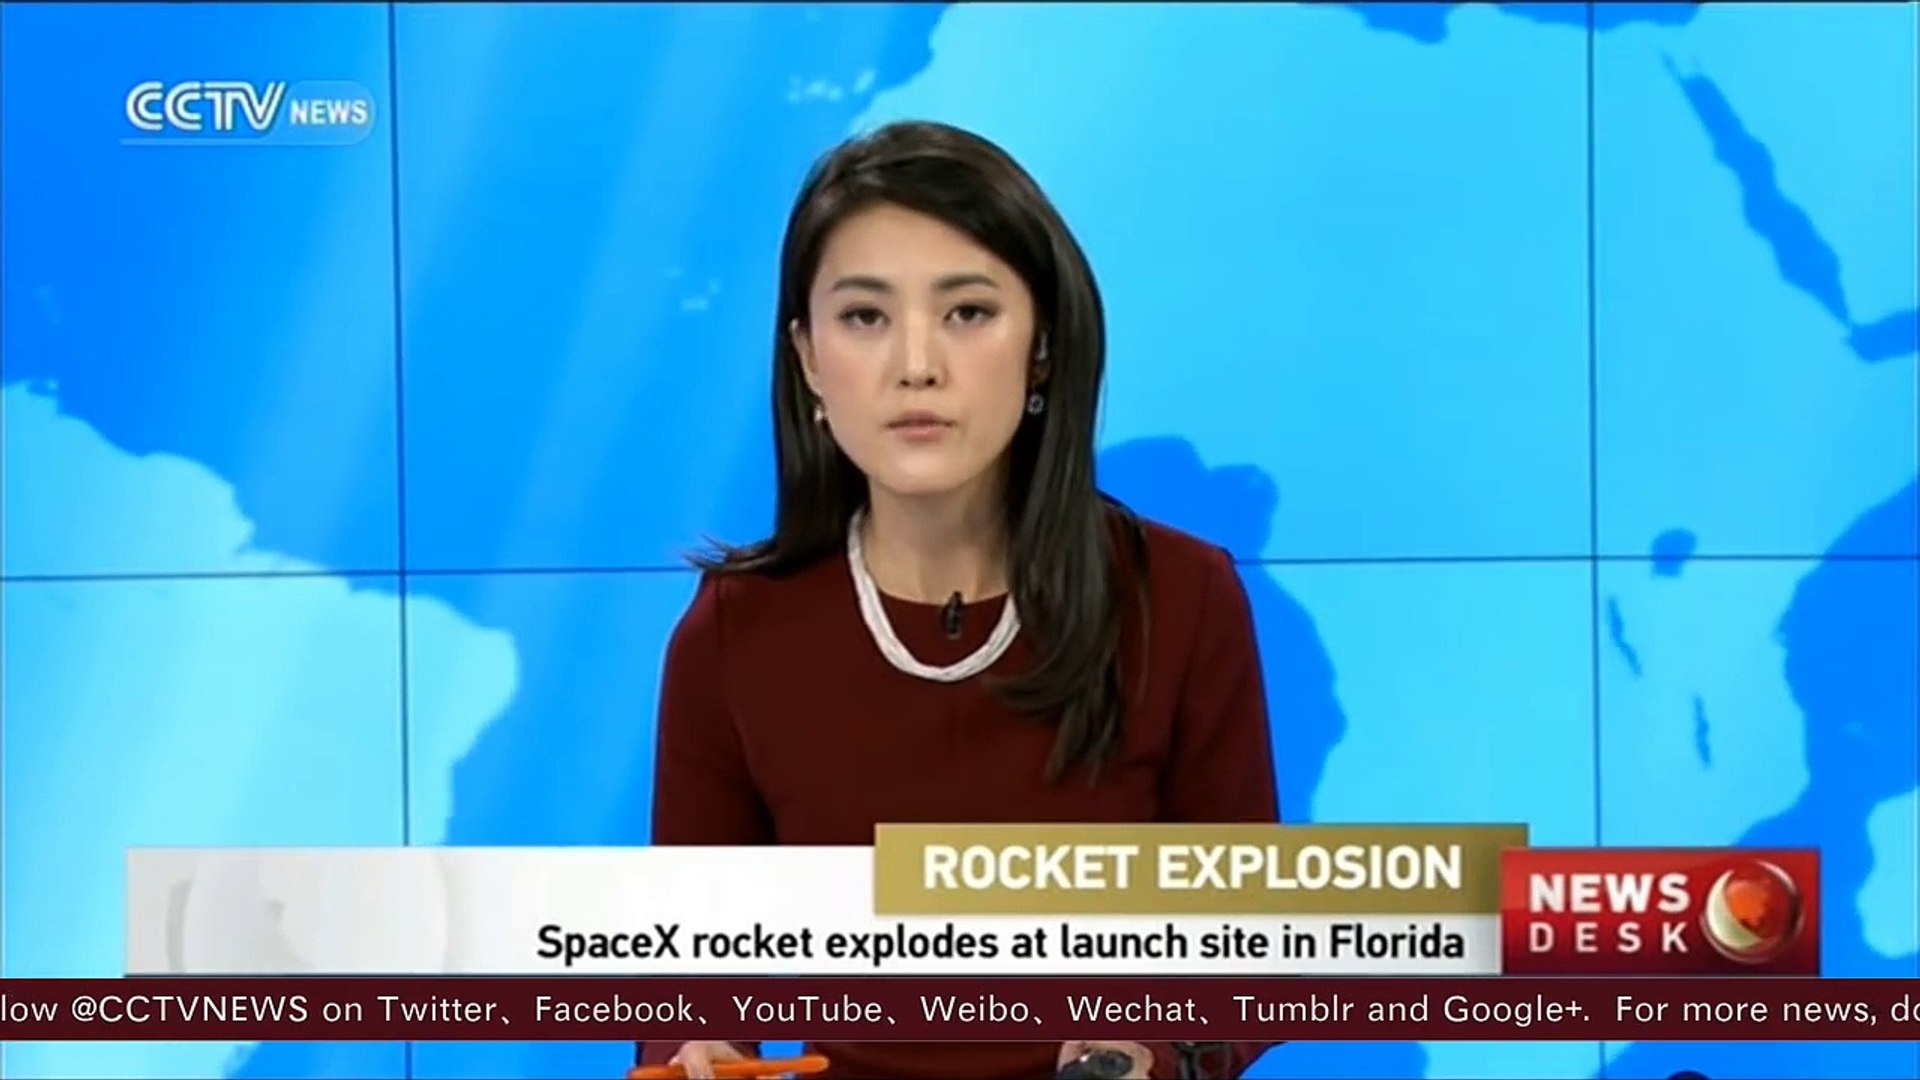 SpaceX rocket explodes at Florida launch site